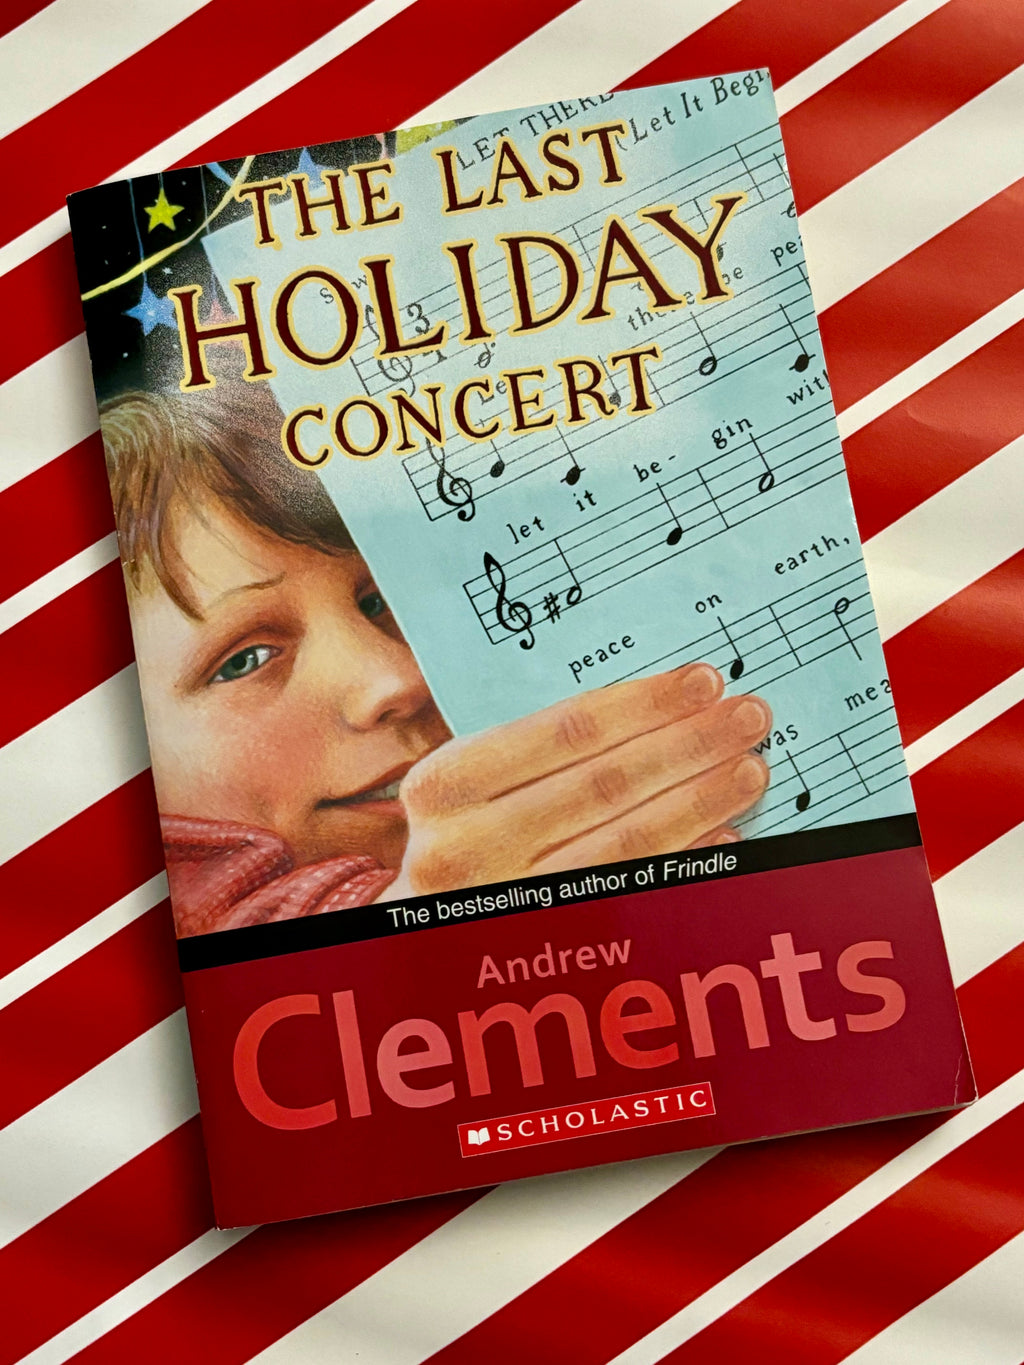 The Last Holiday Concert- By Andrew Clements